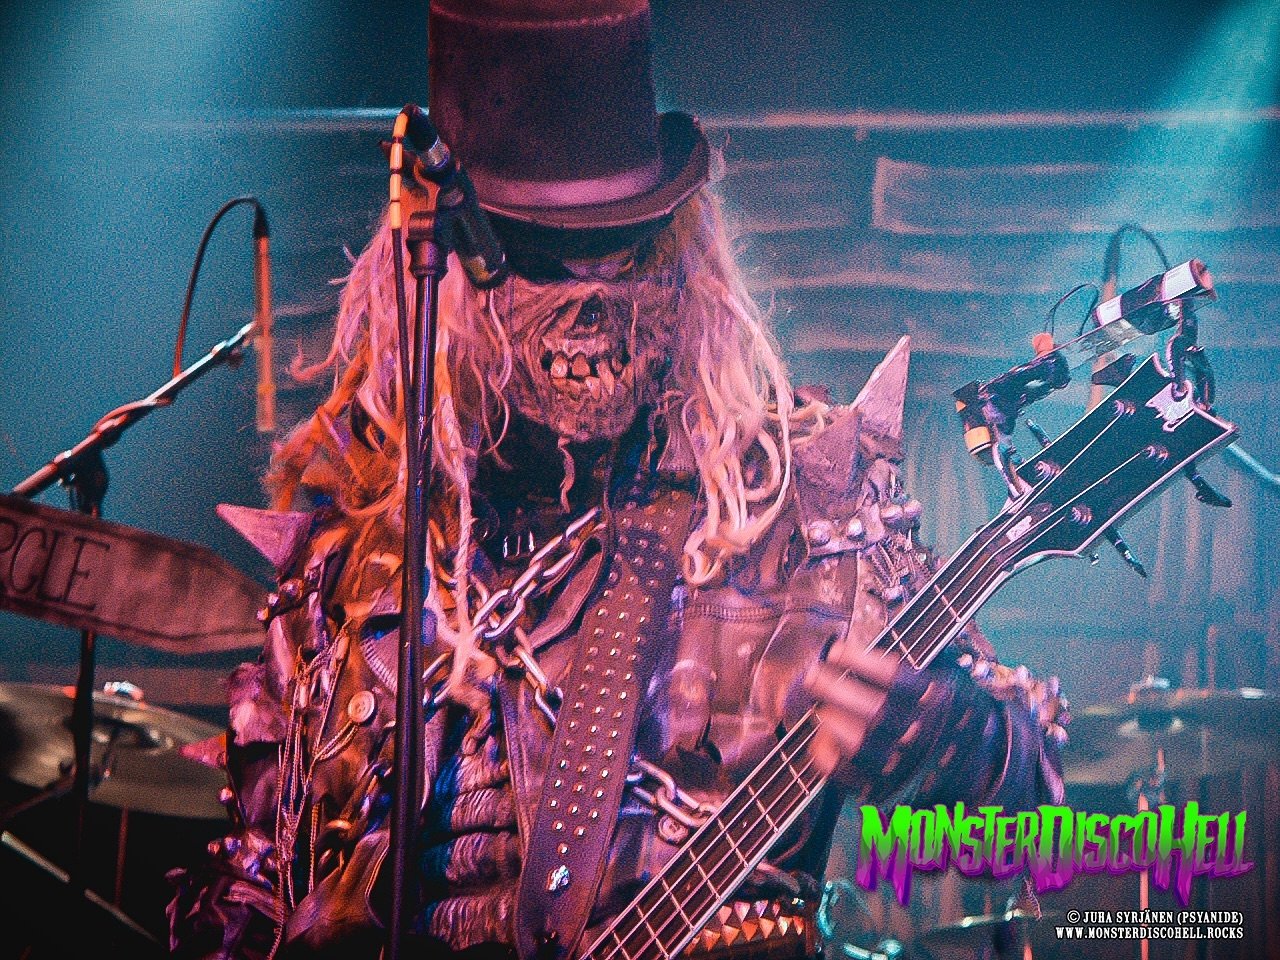 It&rsquo;s been way too long since our previous Kalma post, so let&rsquo;s have some top hat-wearing bikerzombie from hell appreciation for today&rsquo;s Throwback Thursday! Here&rsquo;s the gentlemonsterman in question at Nosturi, Helsinki on May 13